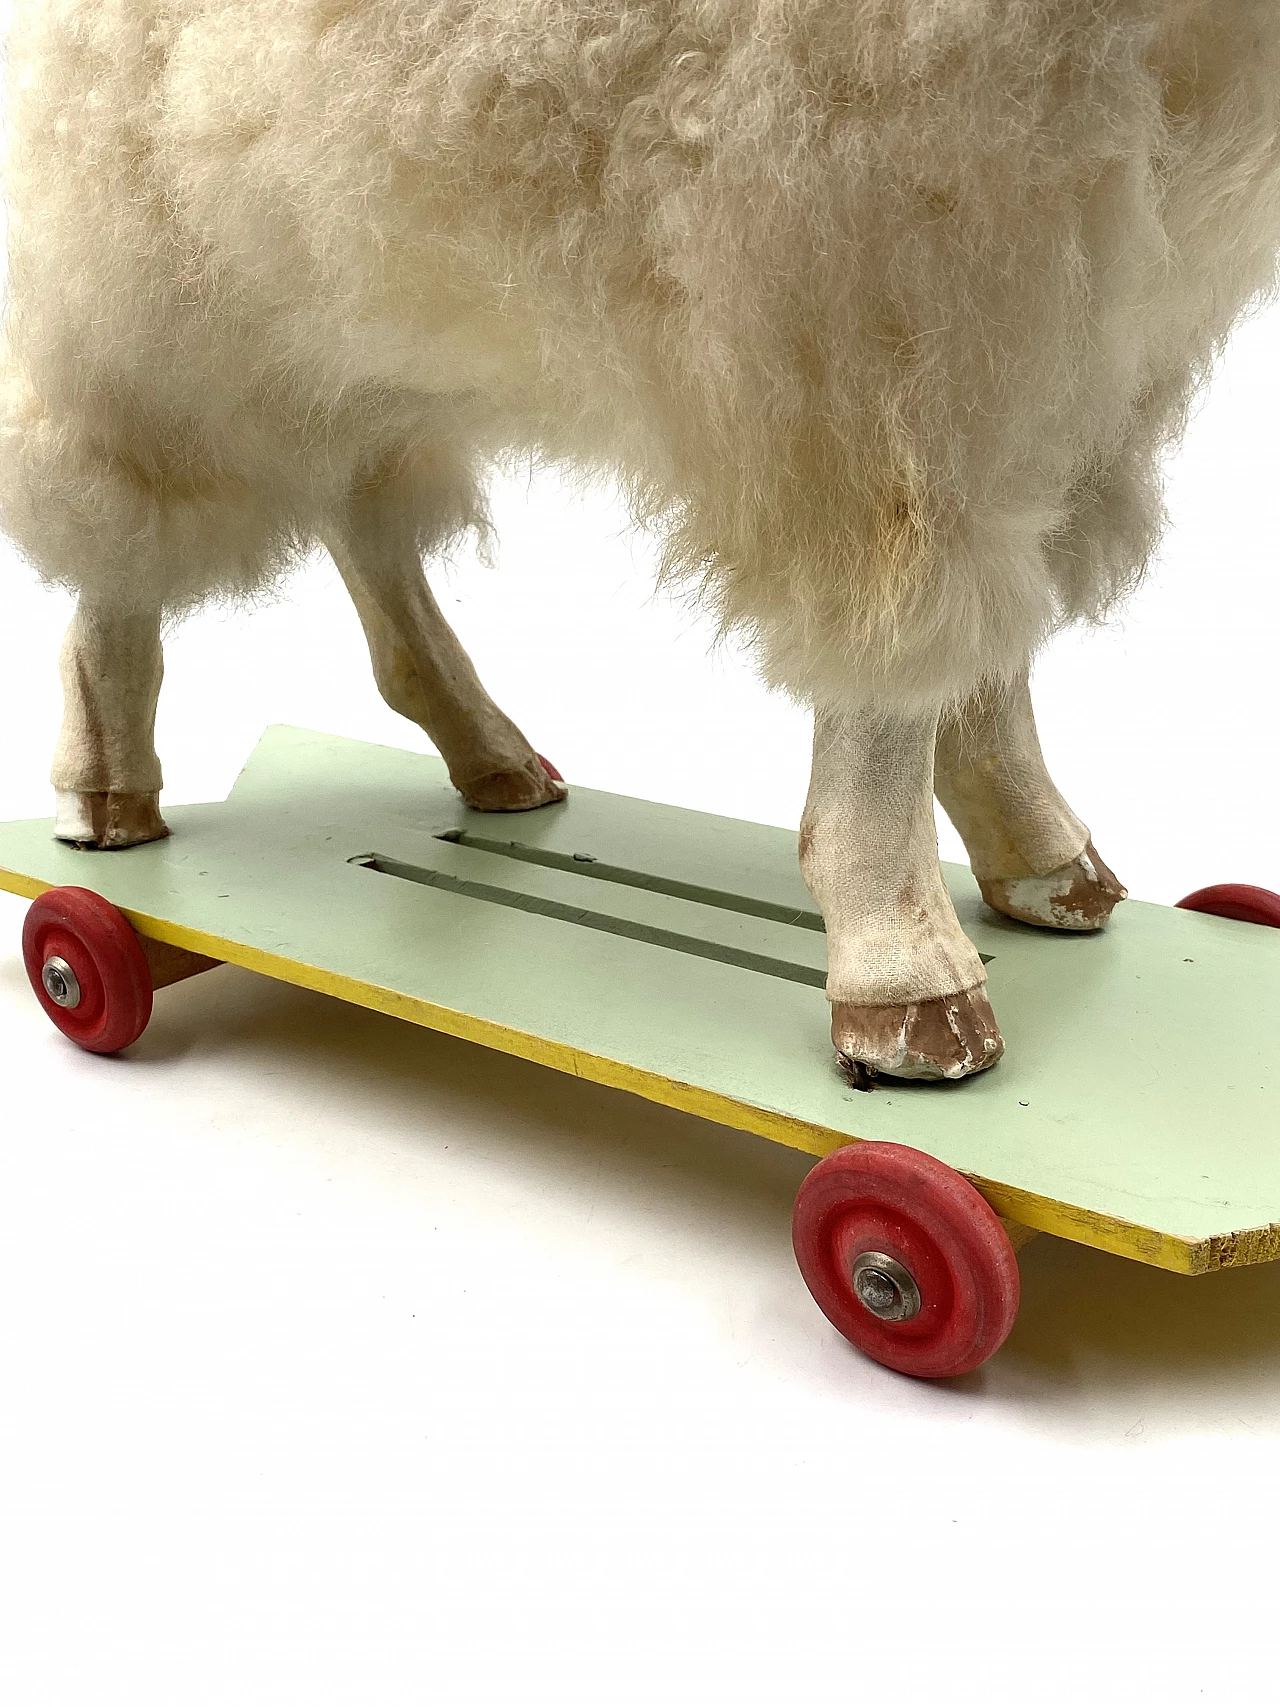 Wool and wood toy sheep with wheels 20